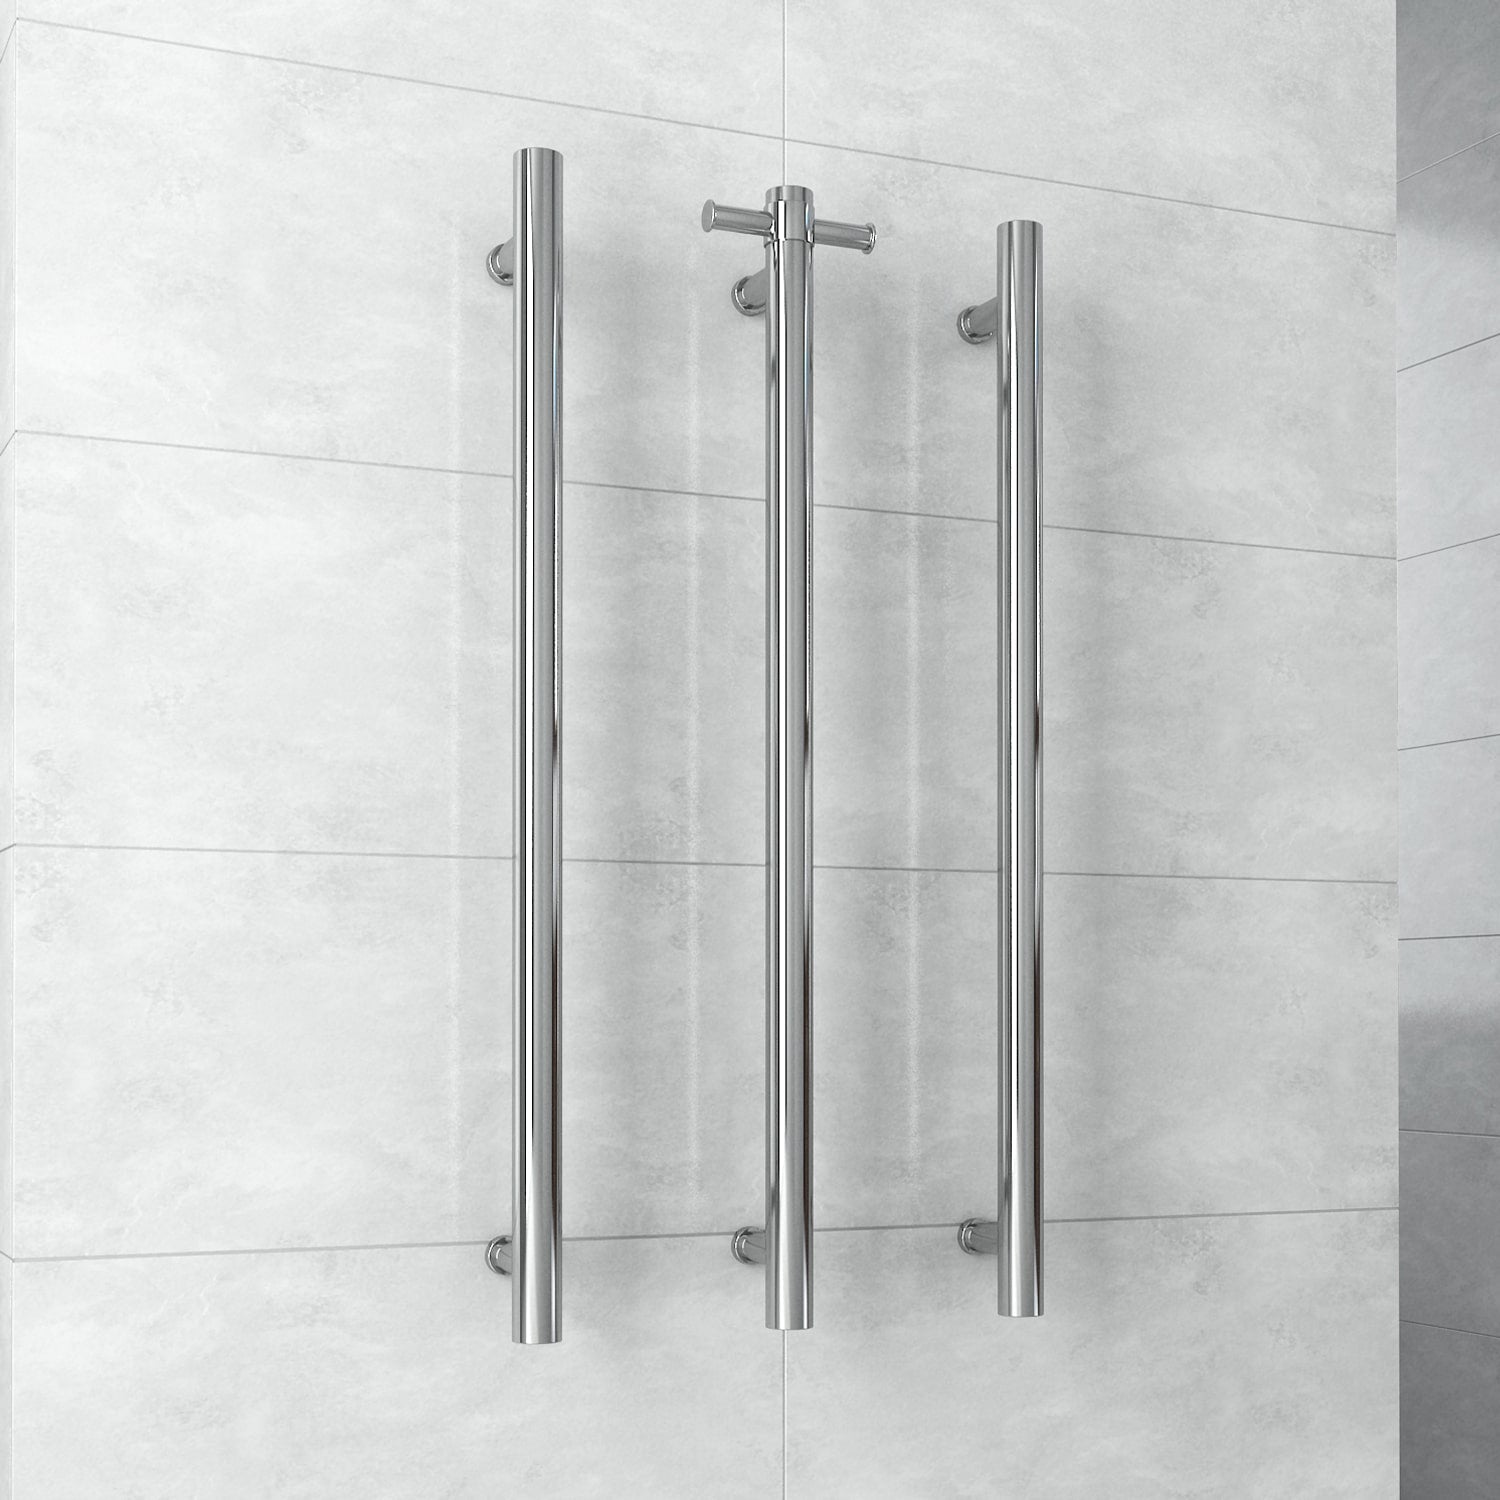 Thermogroup Straight Round Vertical Single Heated Towel Rail Chrome VS900H